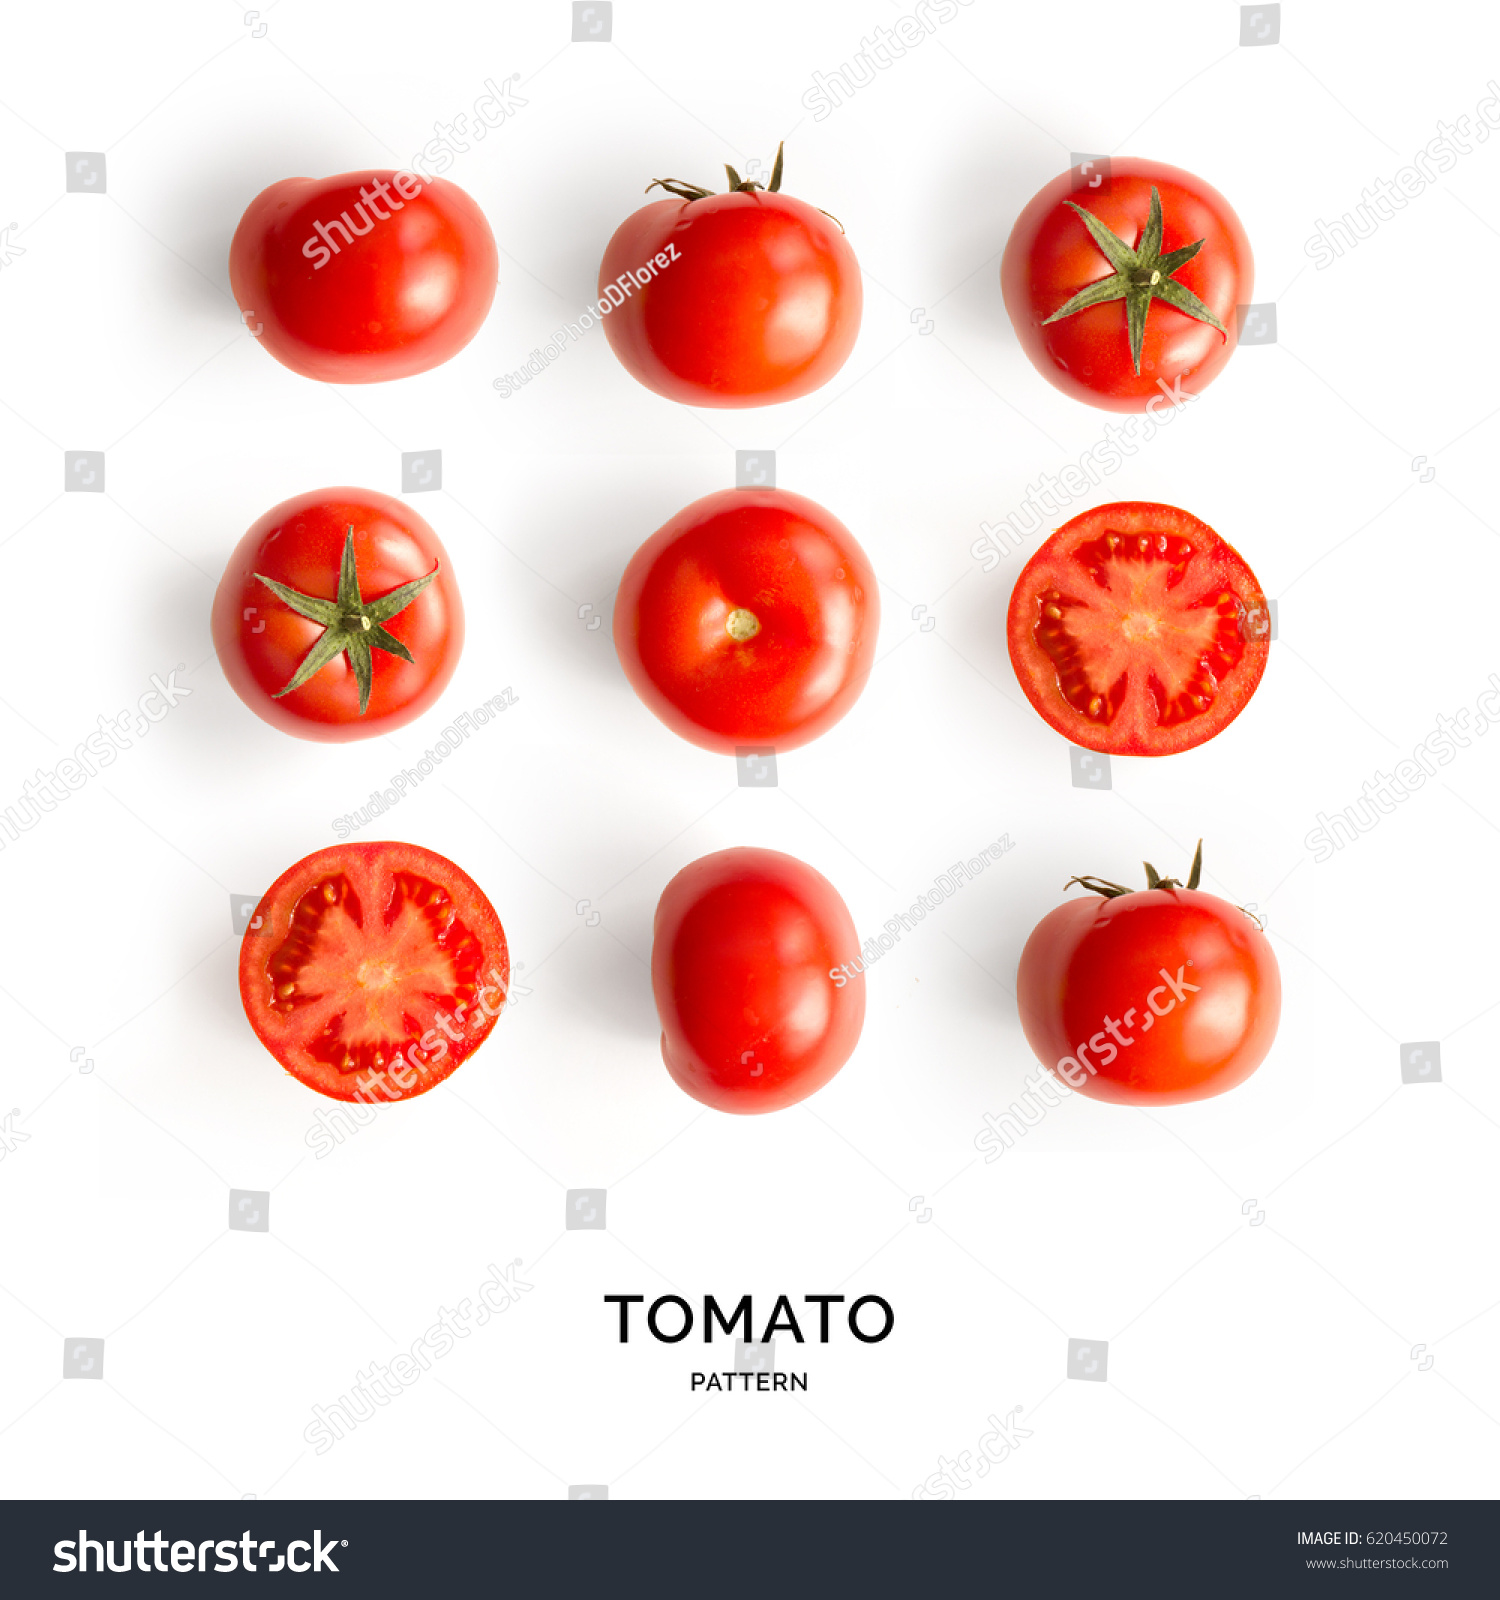 Seamless pattern with tomatoes. Abstract background. Tomato on the white background. #620450072